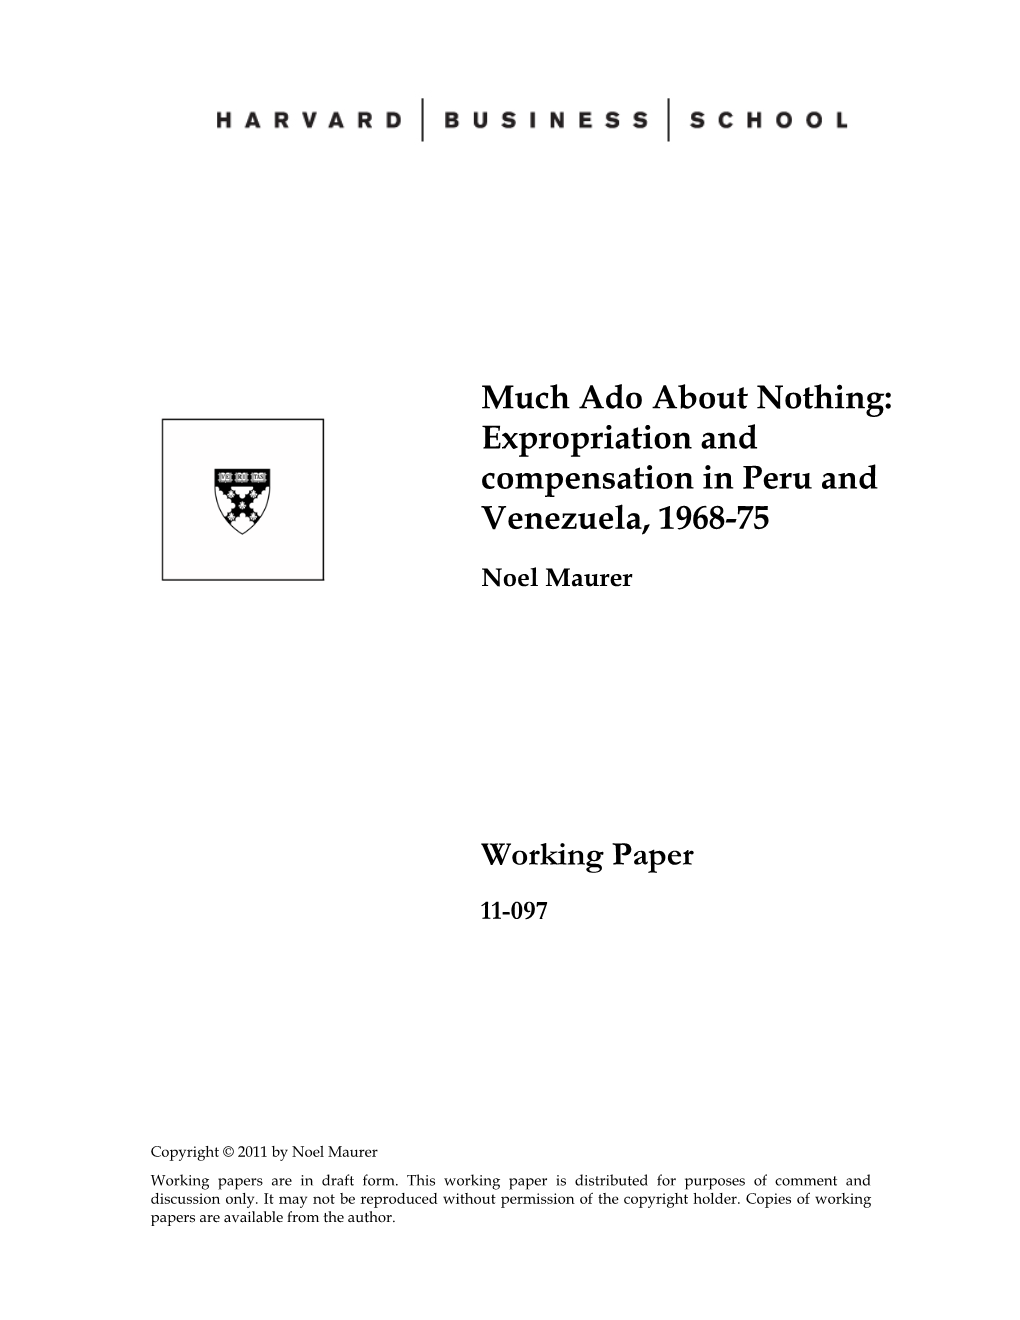 Expropriation and Compensation in Peru and Venezuela, 1968-75